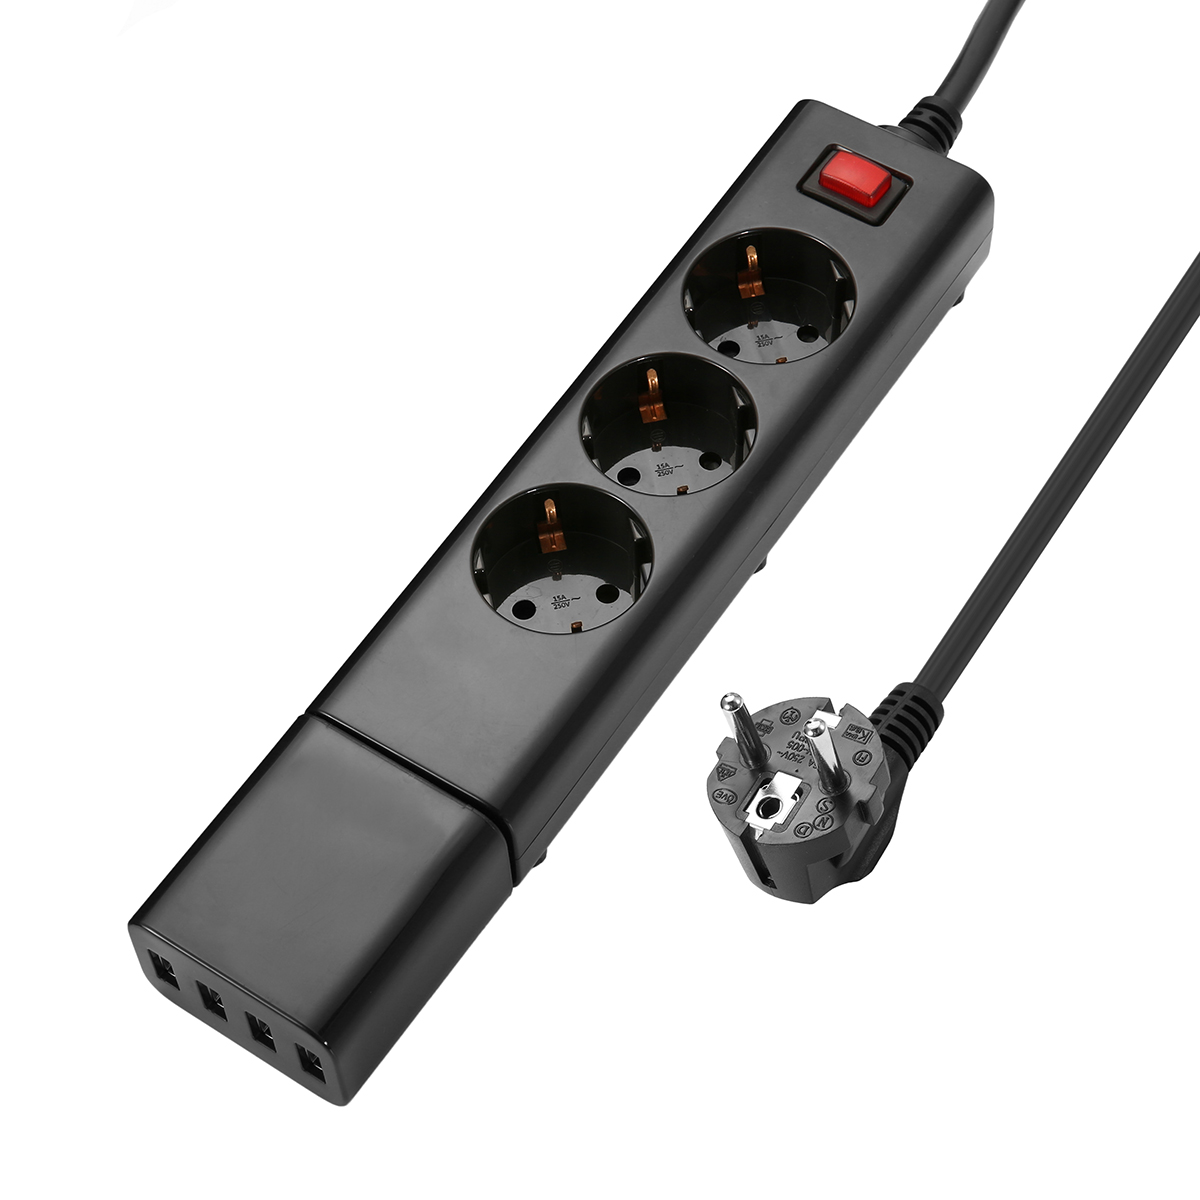 Find 2500W 3-Way Power Strip USB Charger with 3*AC 220V-250V Outlet / 4*USB 2.1A Output EU Plug Detachable USB Charger for Sale on Gipsybee.com with cryptocurrencies